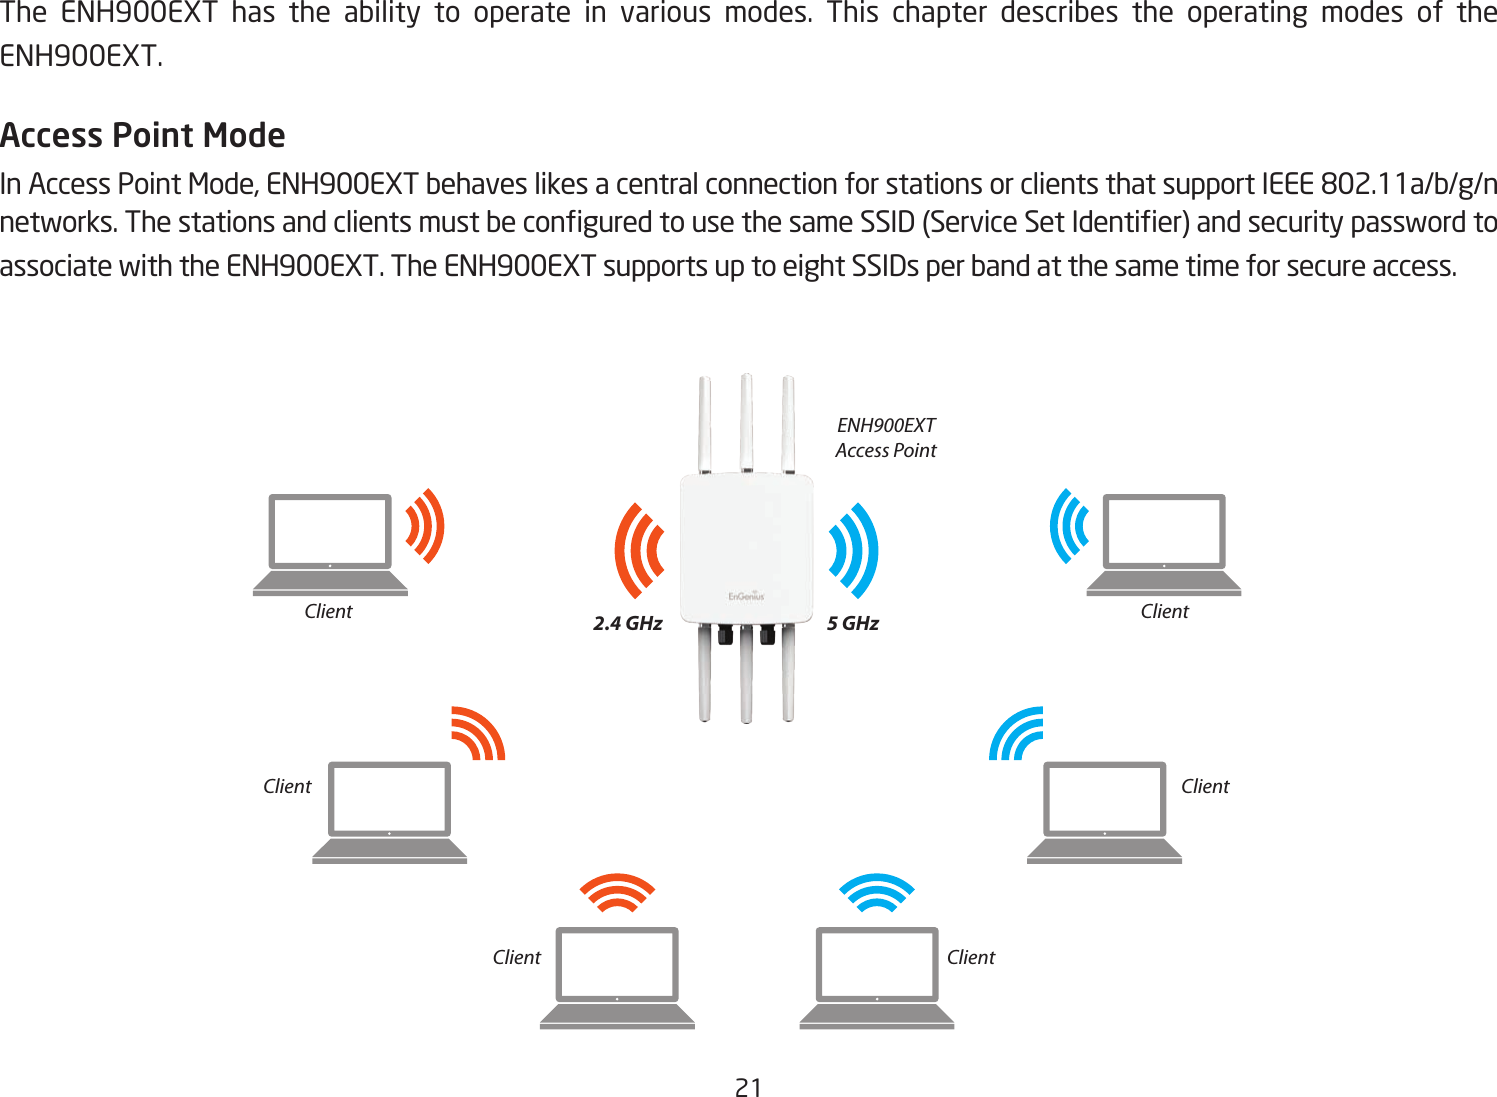 21 The ENH900EXT has the ability to operate in various modes. This chapter describes the operating modes of the ENH900EXT.Access Point ModeInAccessPointMode,ENH900EXTbehaveslikesacentralconnectionforstationsorclientsthatsupportIEEE802.11a/b/g/nnetworks.ThestationsandclientsmustbeconguredtousethesameSSID(ServiceSetIdentier)andsecuritypasswordtoassociate with the ENH900EXT. The ENH900EXT supports up to eight SSIDs per band at the same time for secure access.  ENH900EXTAccess Point ClientClient ClientClient ClientClient2.4 GHz 5 GHz